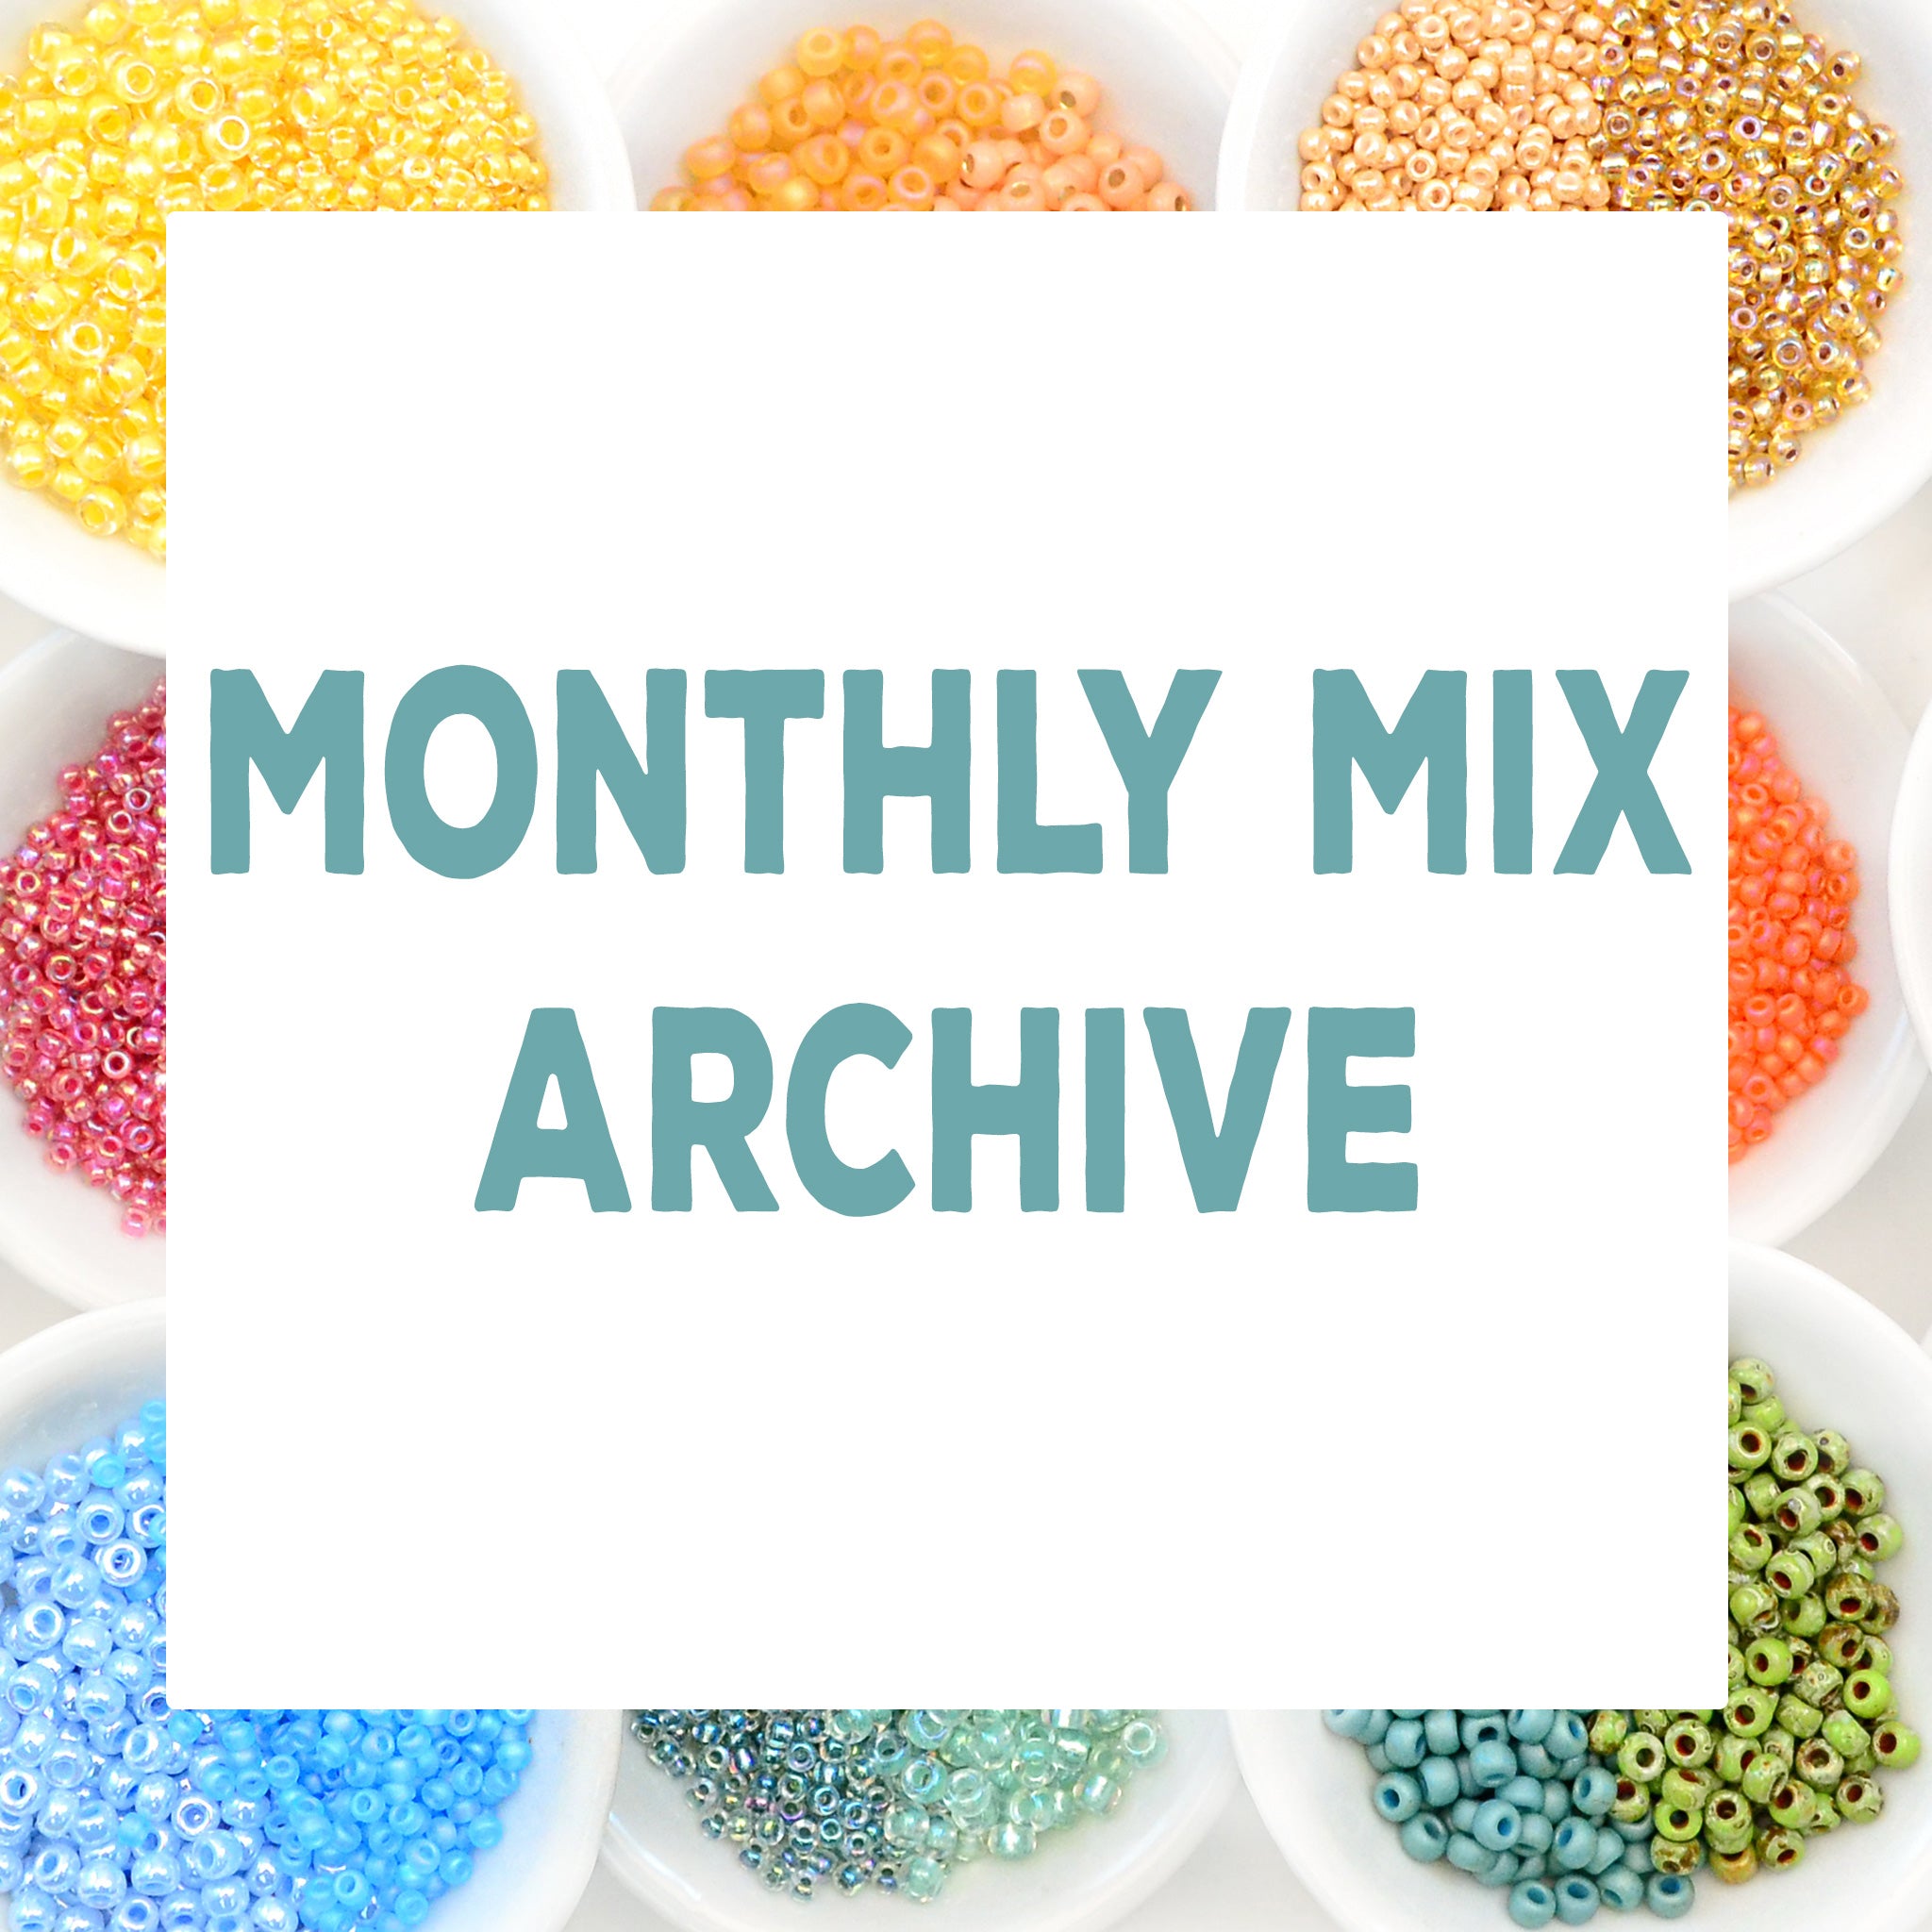 Monthly Mix Archive